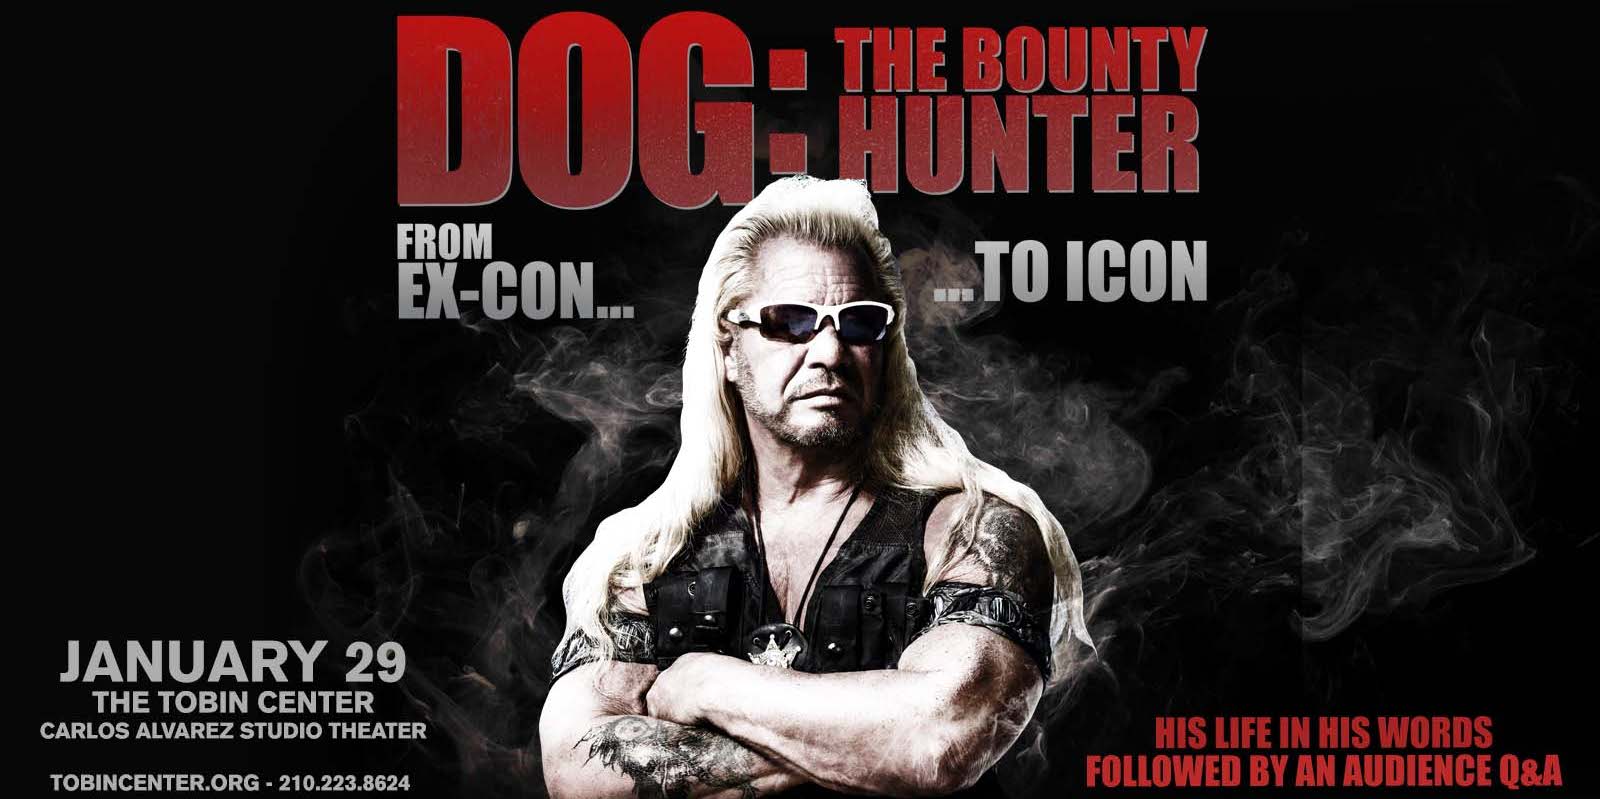 An Evening with Dog the Bounty Hunter promotional image